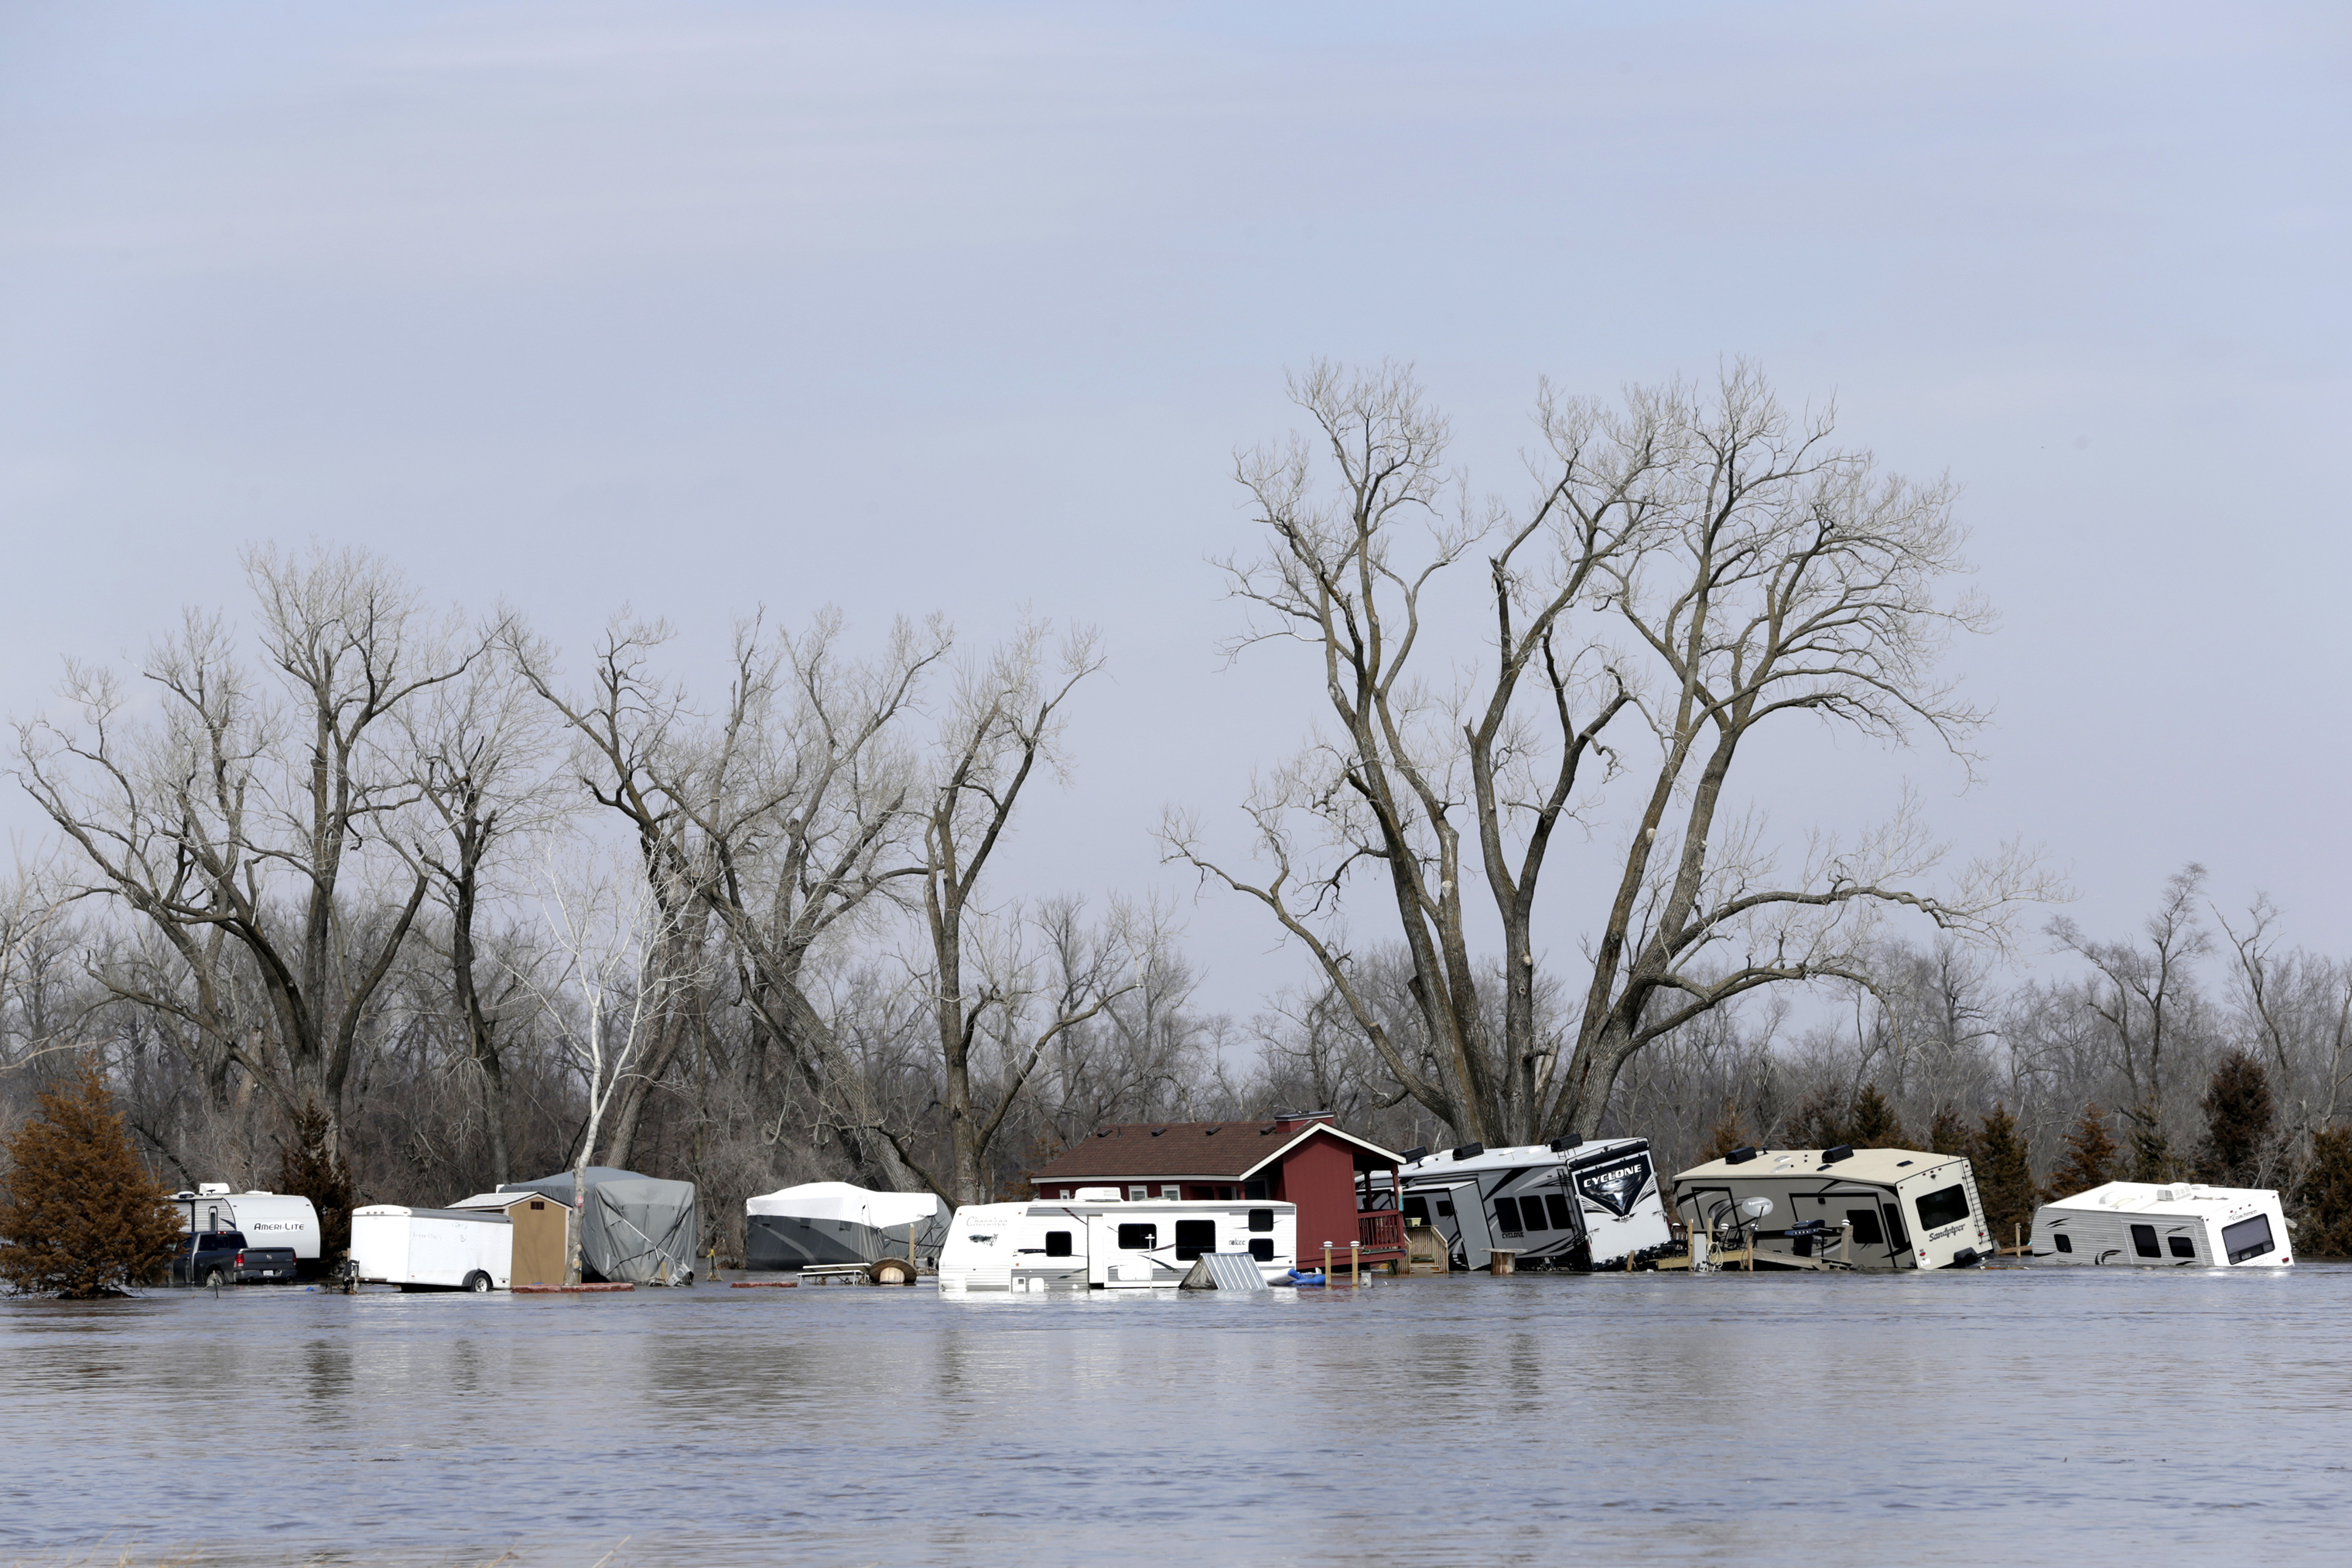 RVs, washed away by the flood waters of the Platte River, are seen in Merritt's RV Park in Plattsmouth, Nebraska, March 17, 2019. (Nati Harnik—AP)